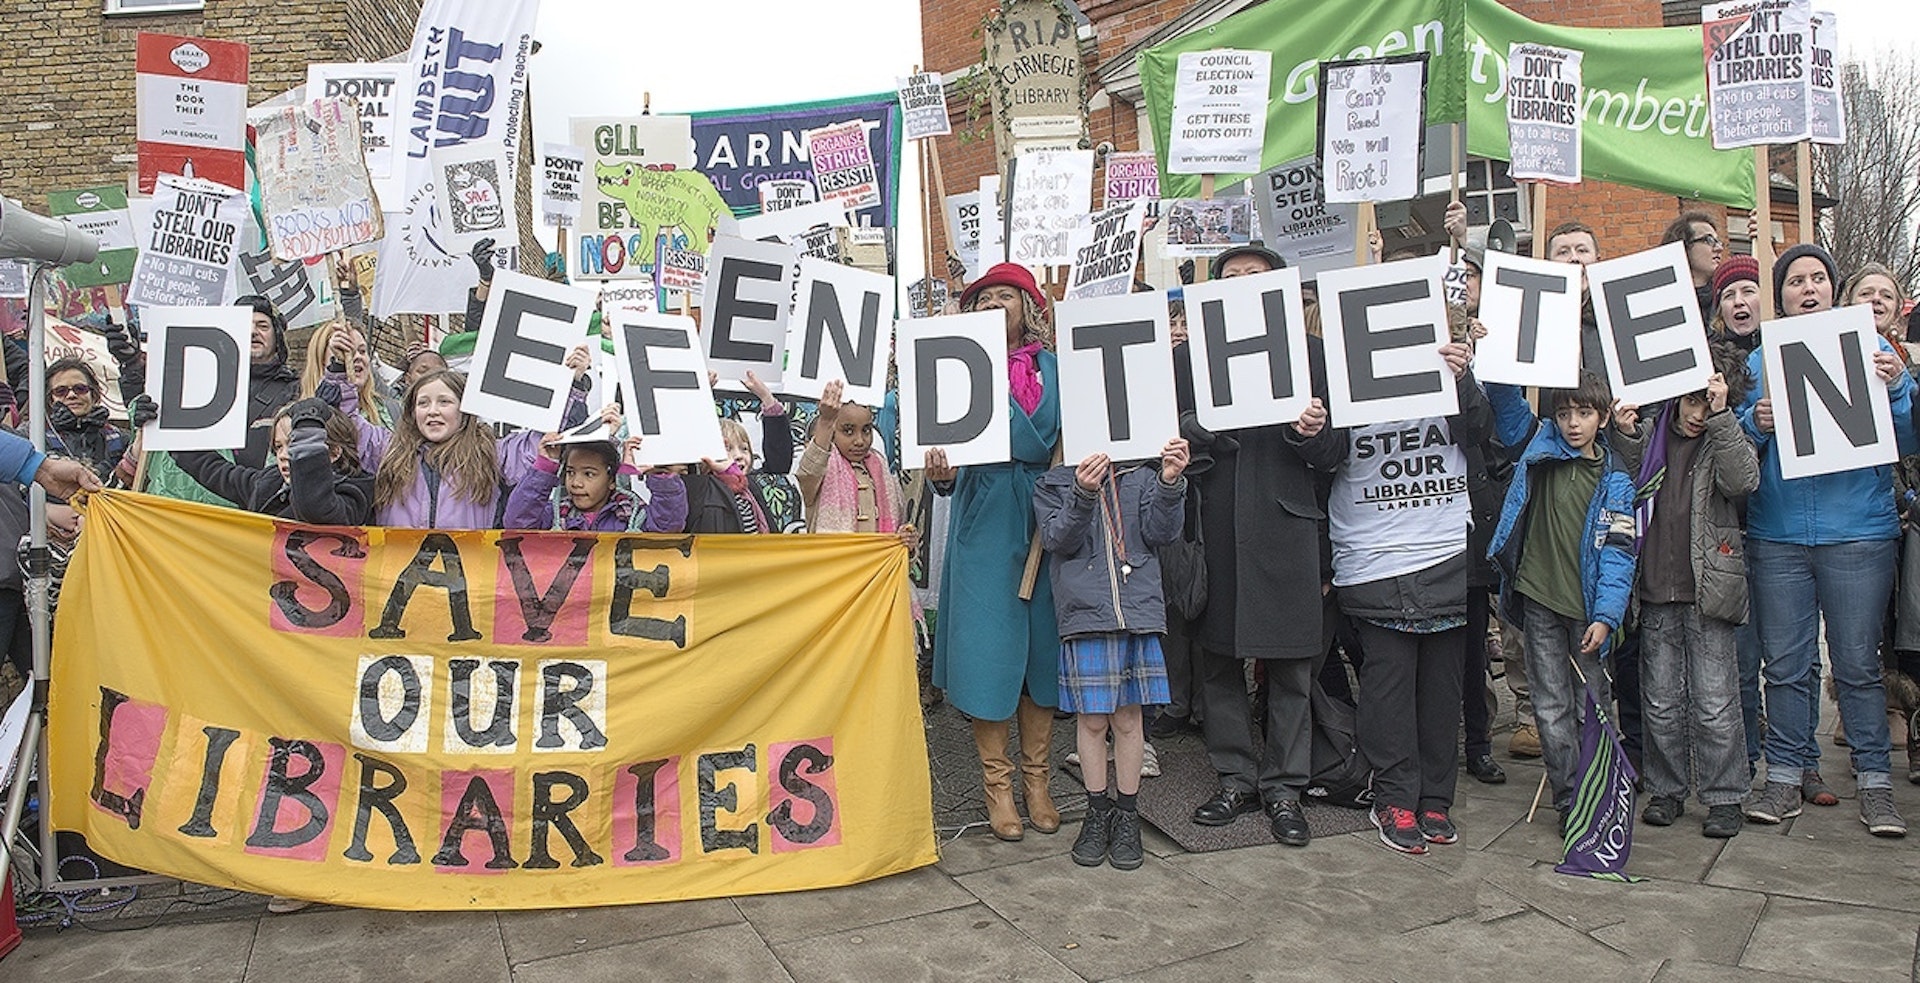 South Londoners have occupied a library to stop it closing